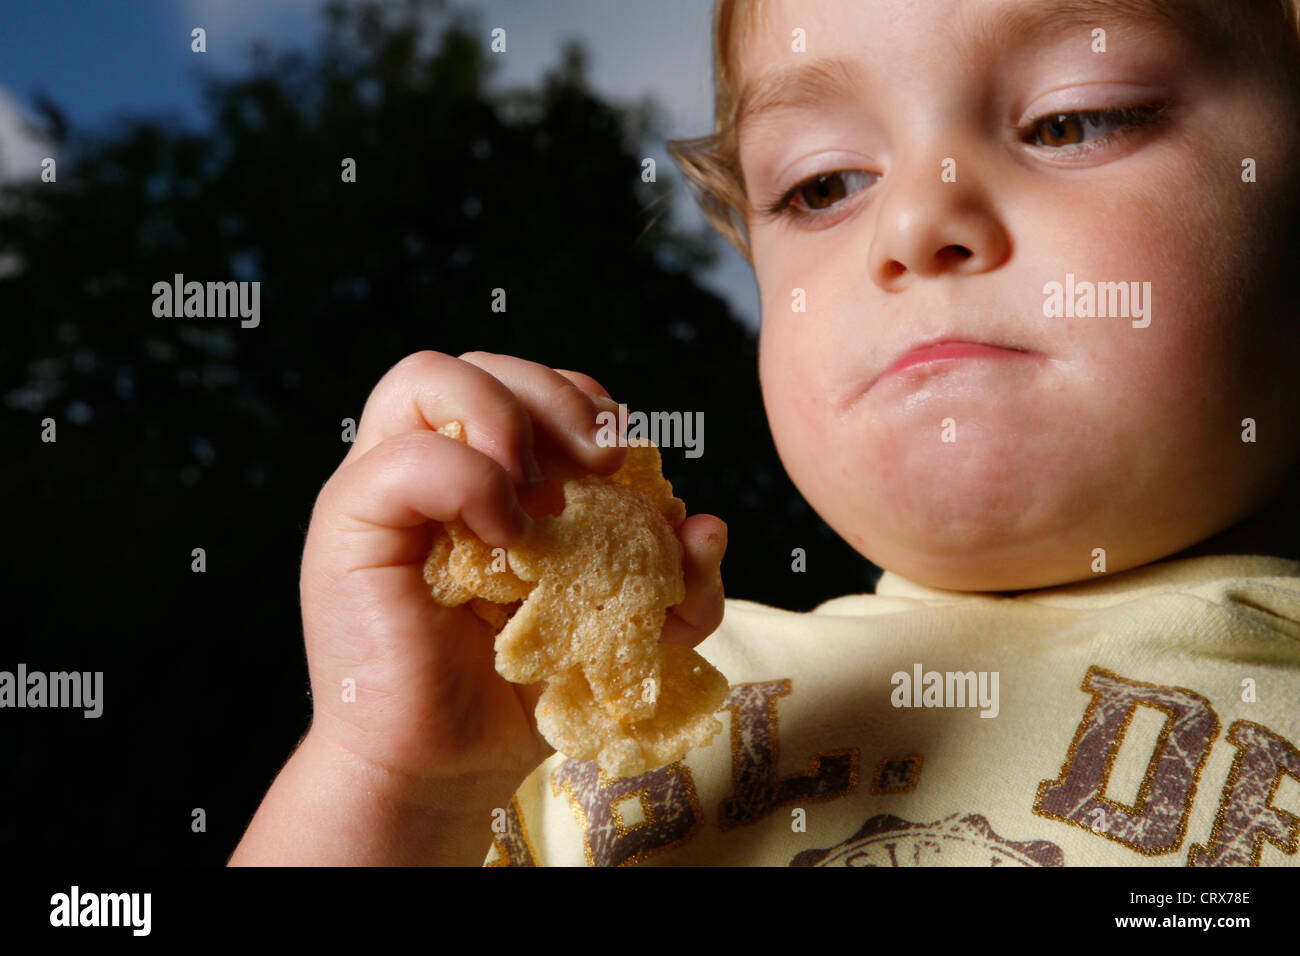 A baby with a handful of unhealthy potato crisps. Stock Photo